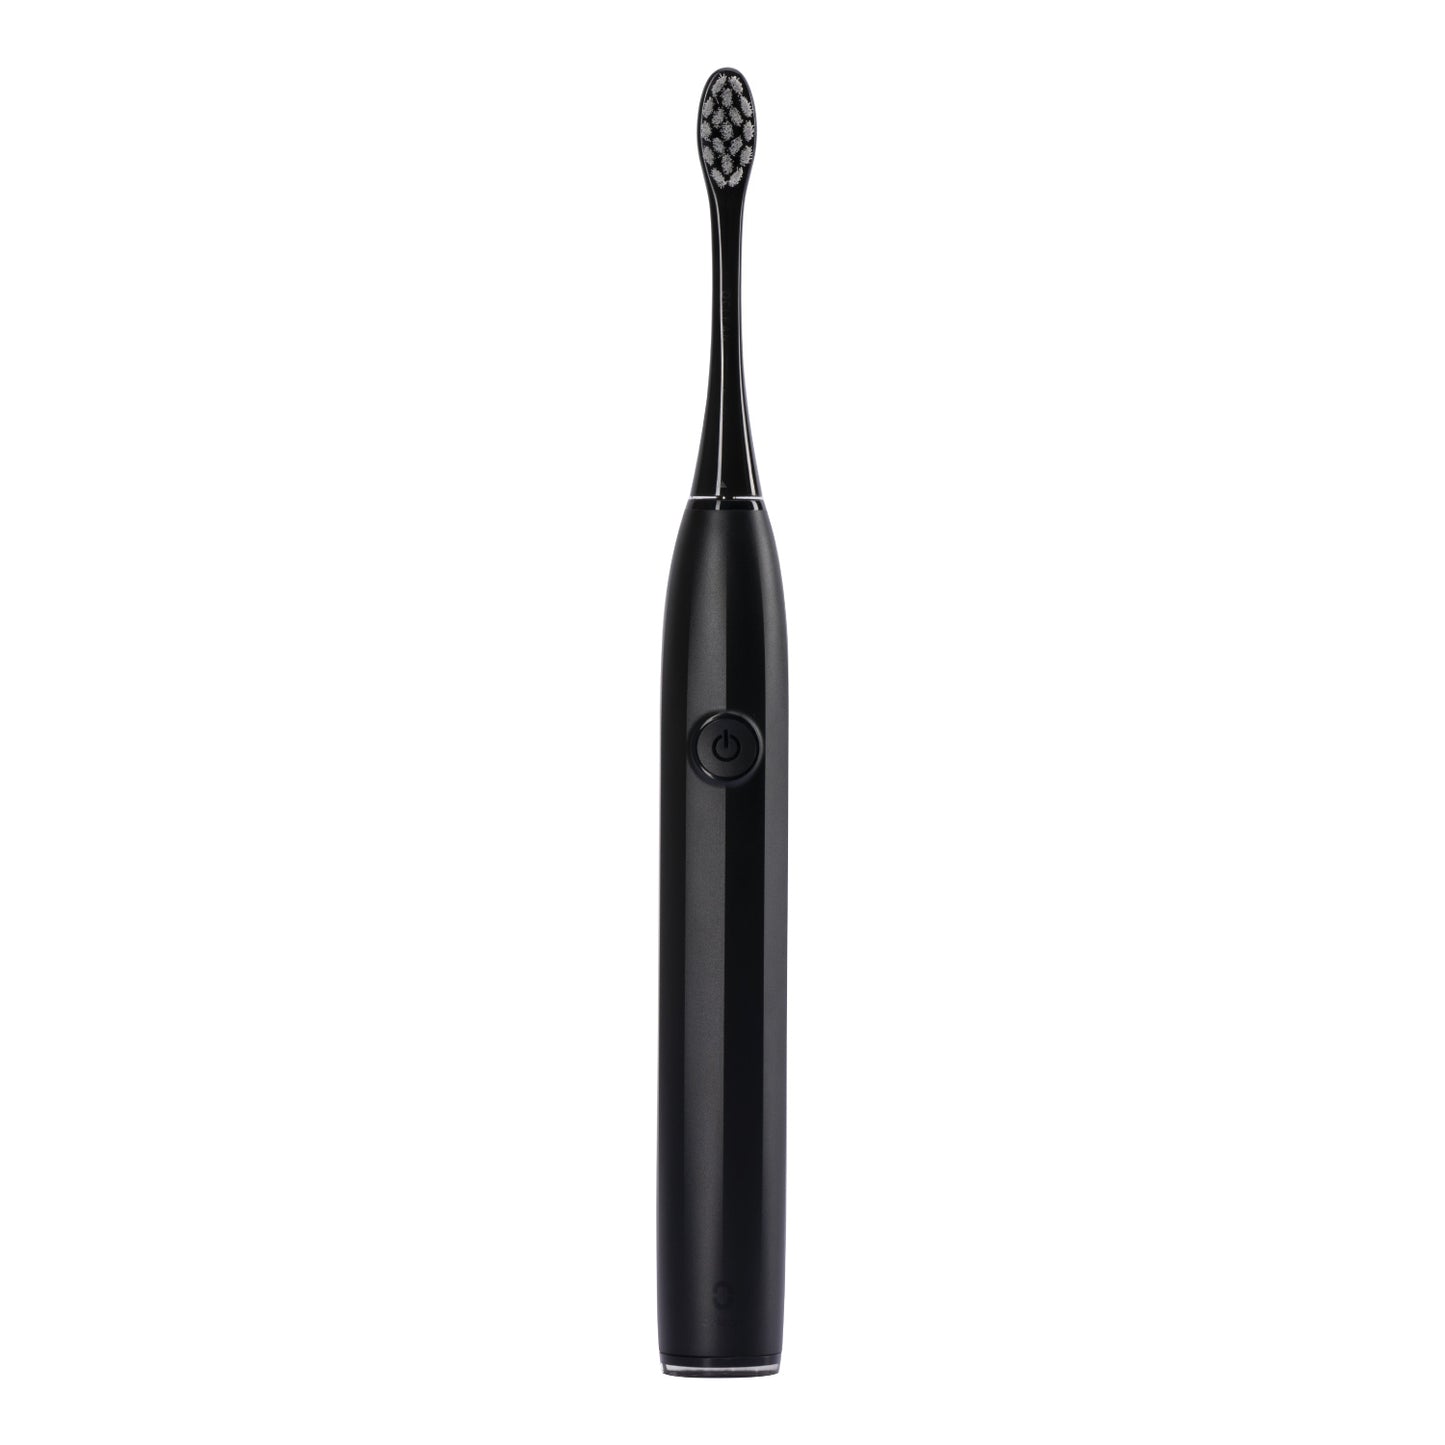 Oclean Endurance Eco Electric Toothbrush color Black